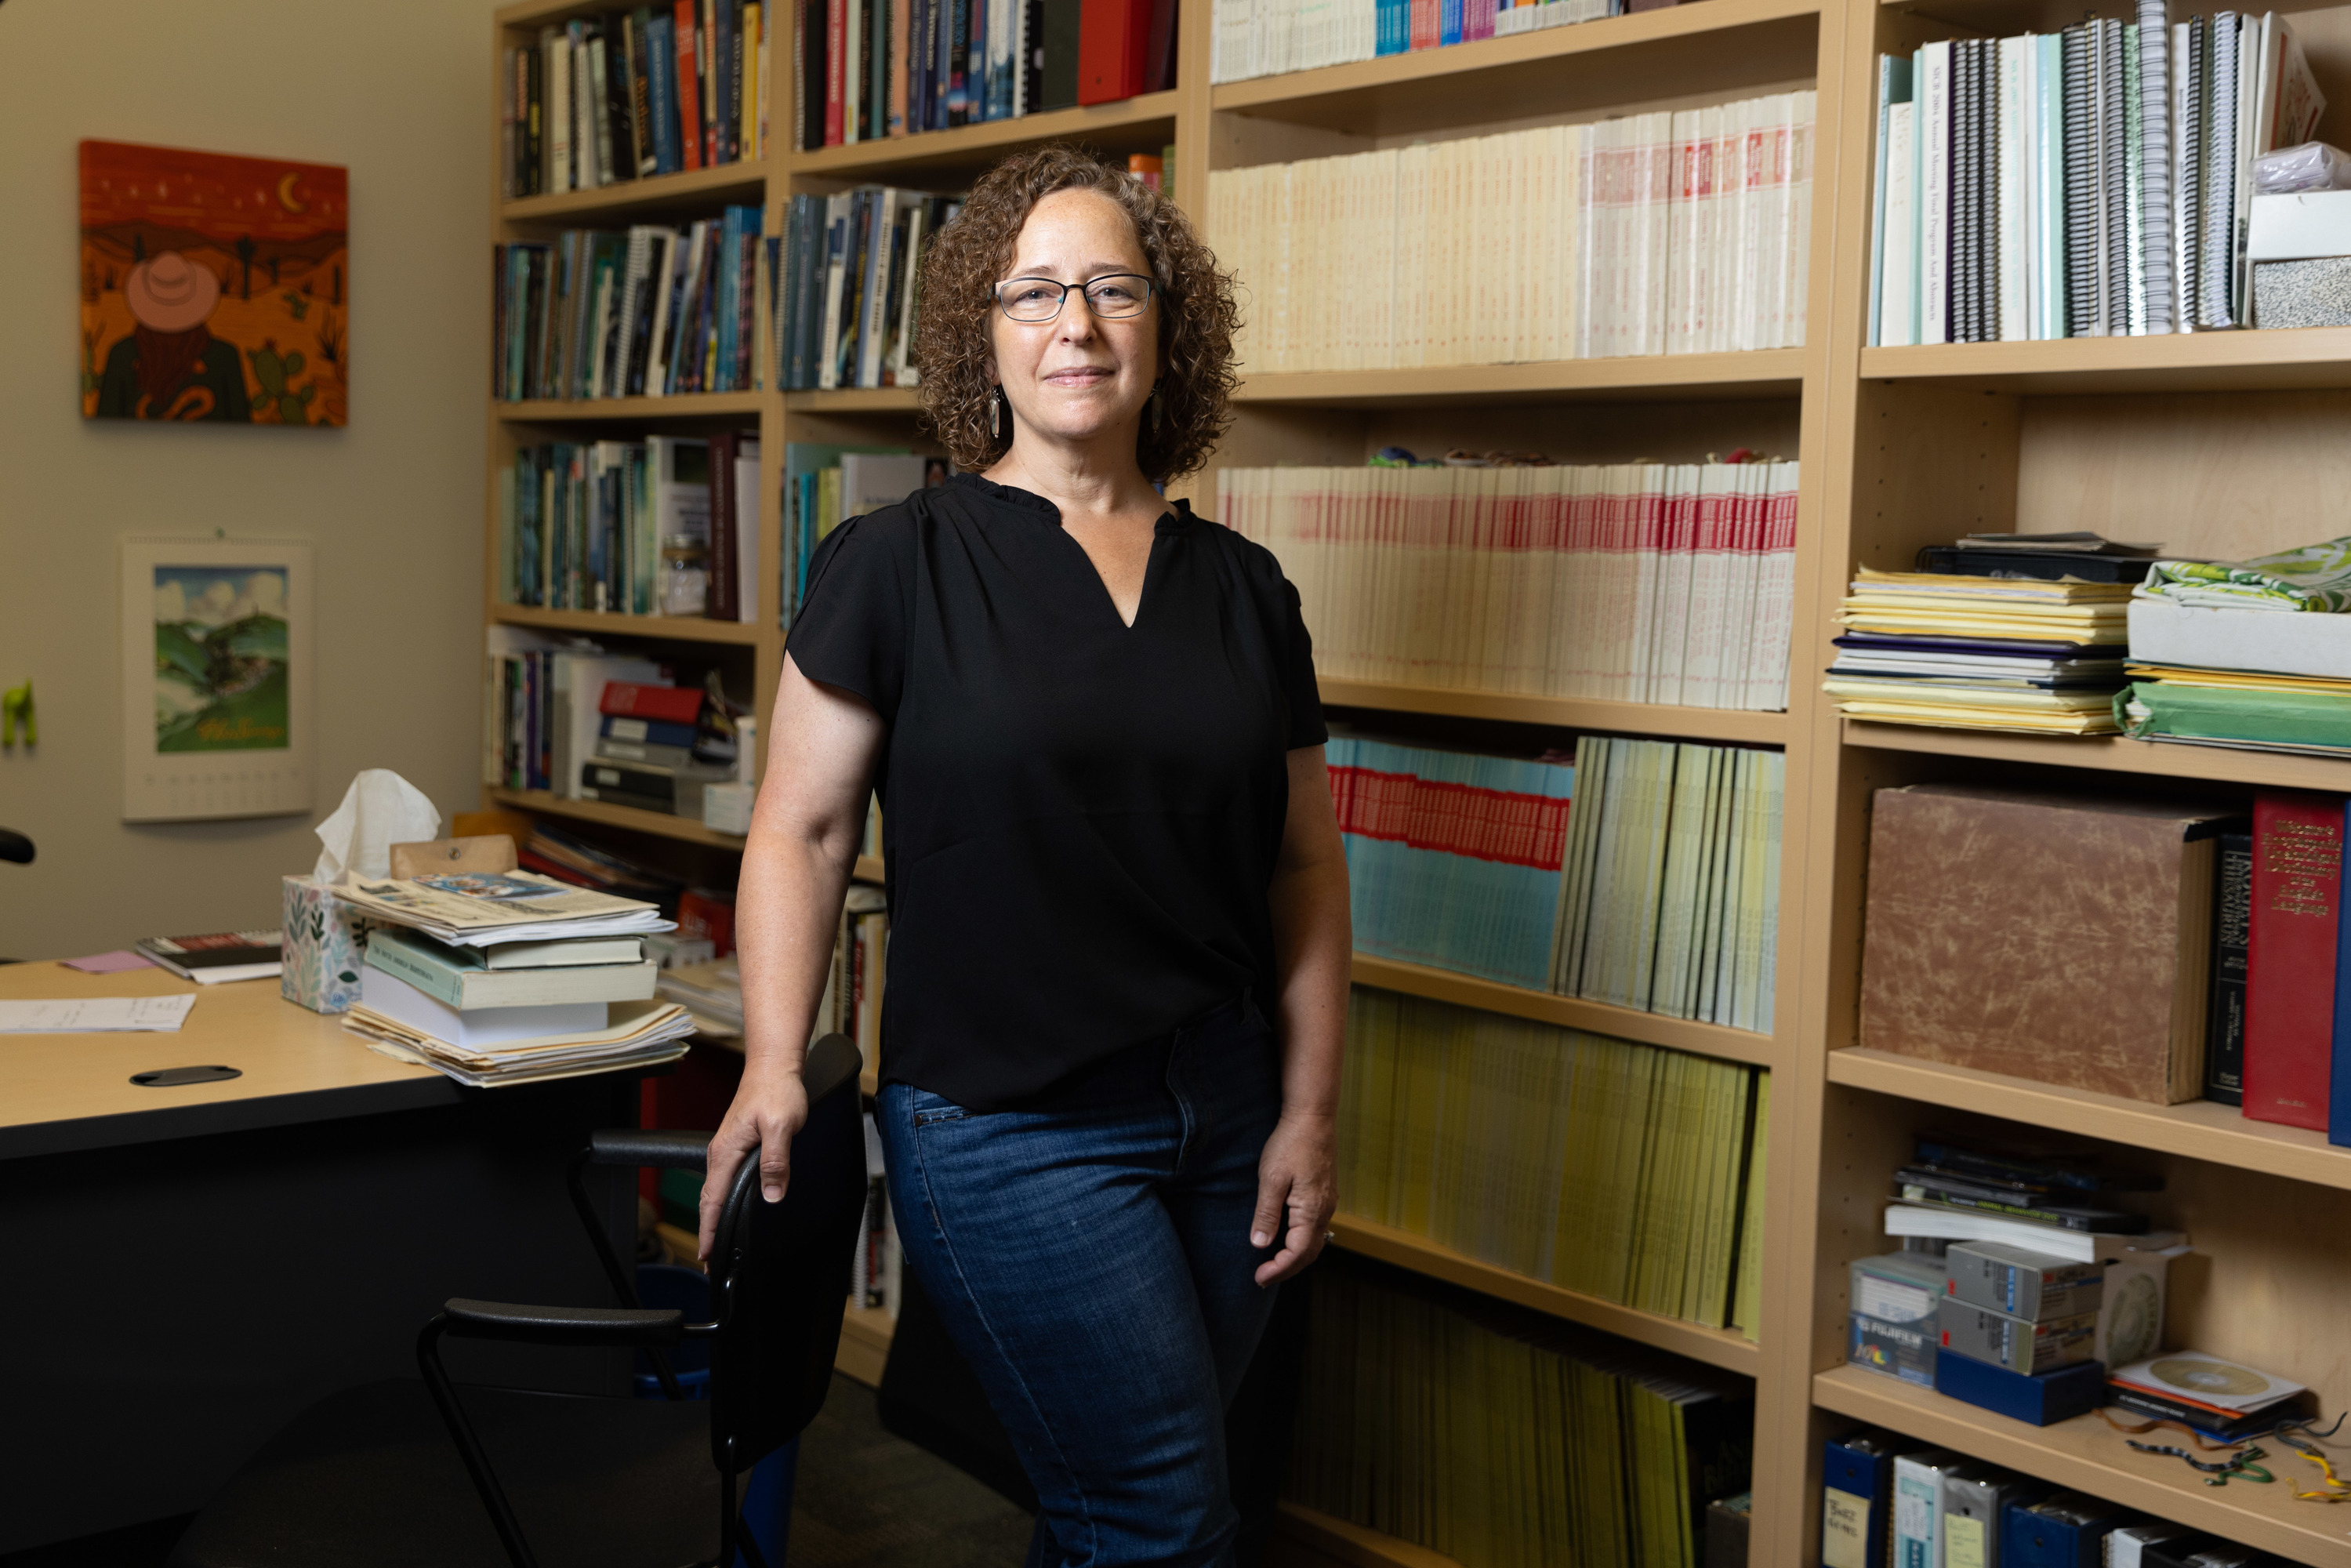 Professor Stacey Weiss, associate chair of biology and William L. McCormick Professor of Natural Sciences, stands in her office.